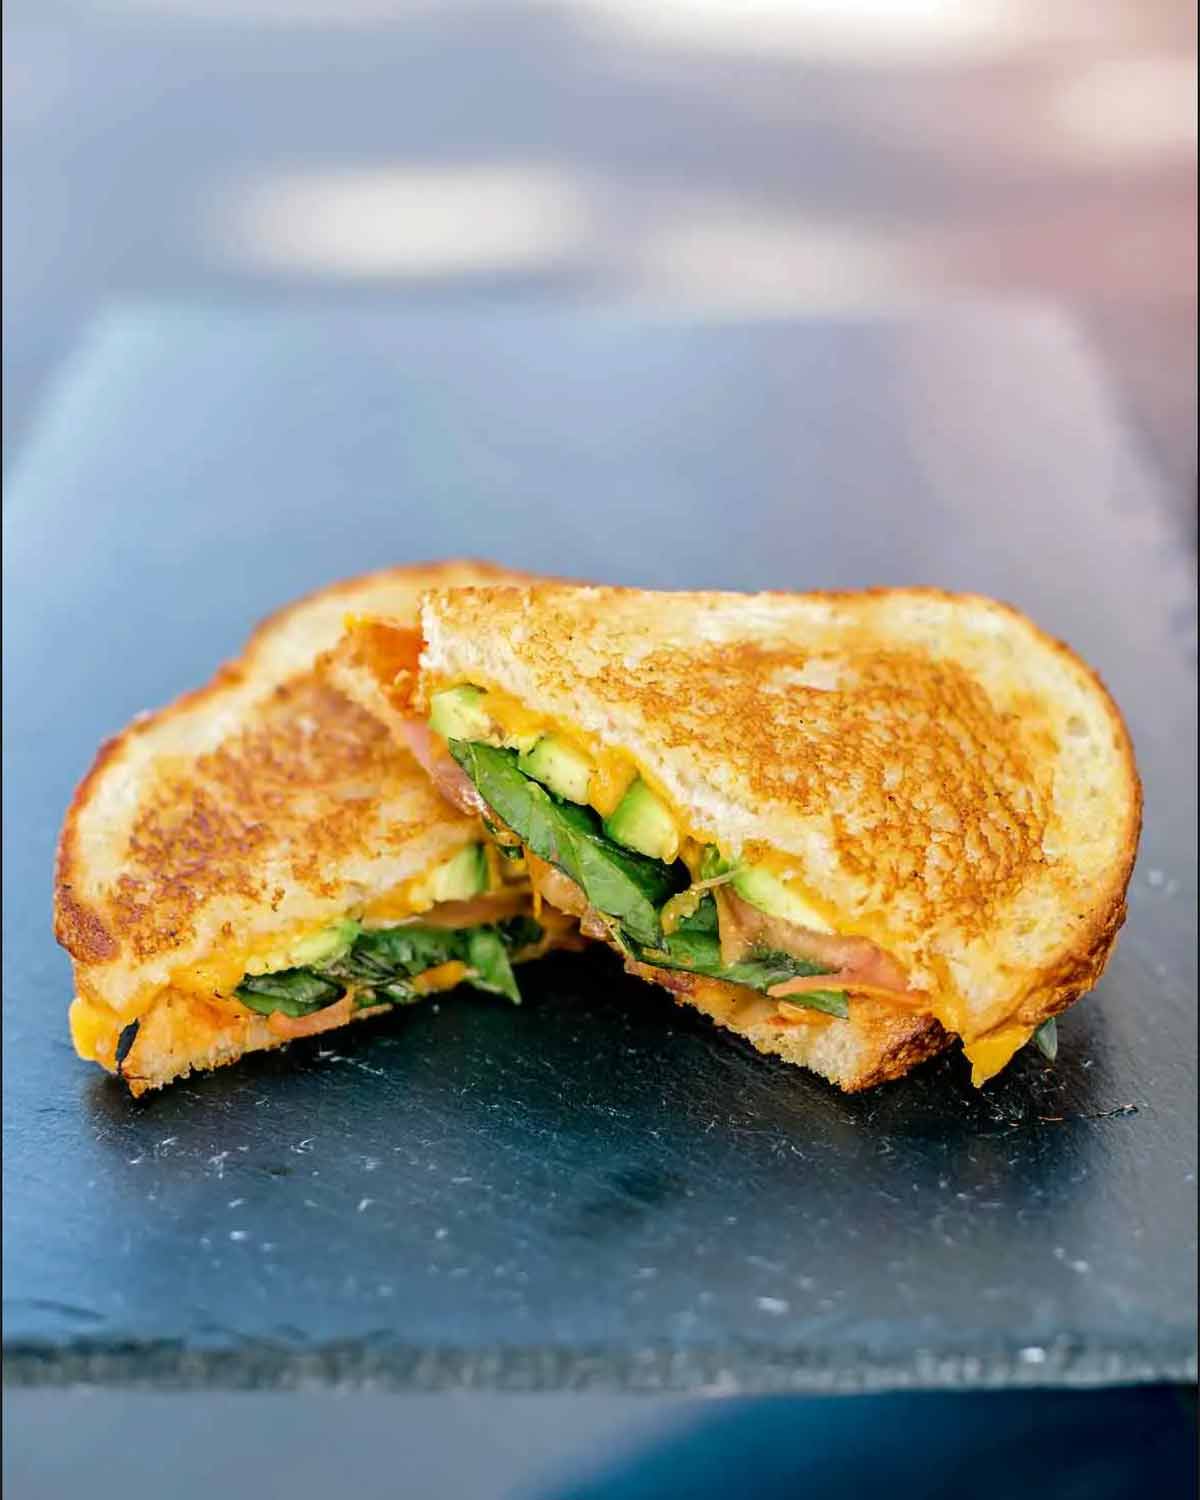 A veggie grilled cheese sandwich sliced in half on a glass platter